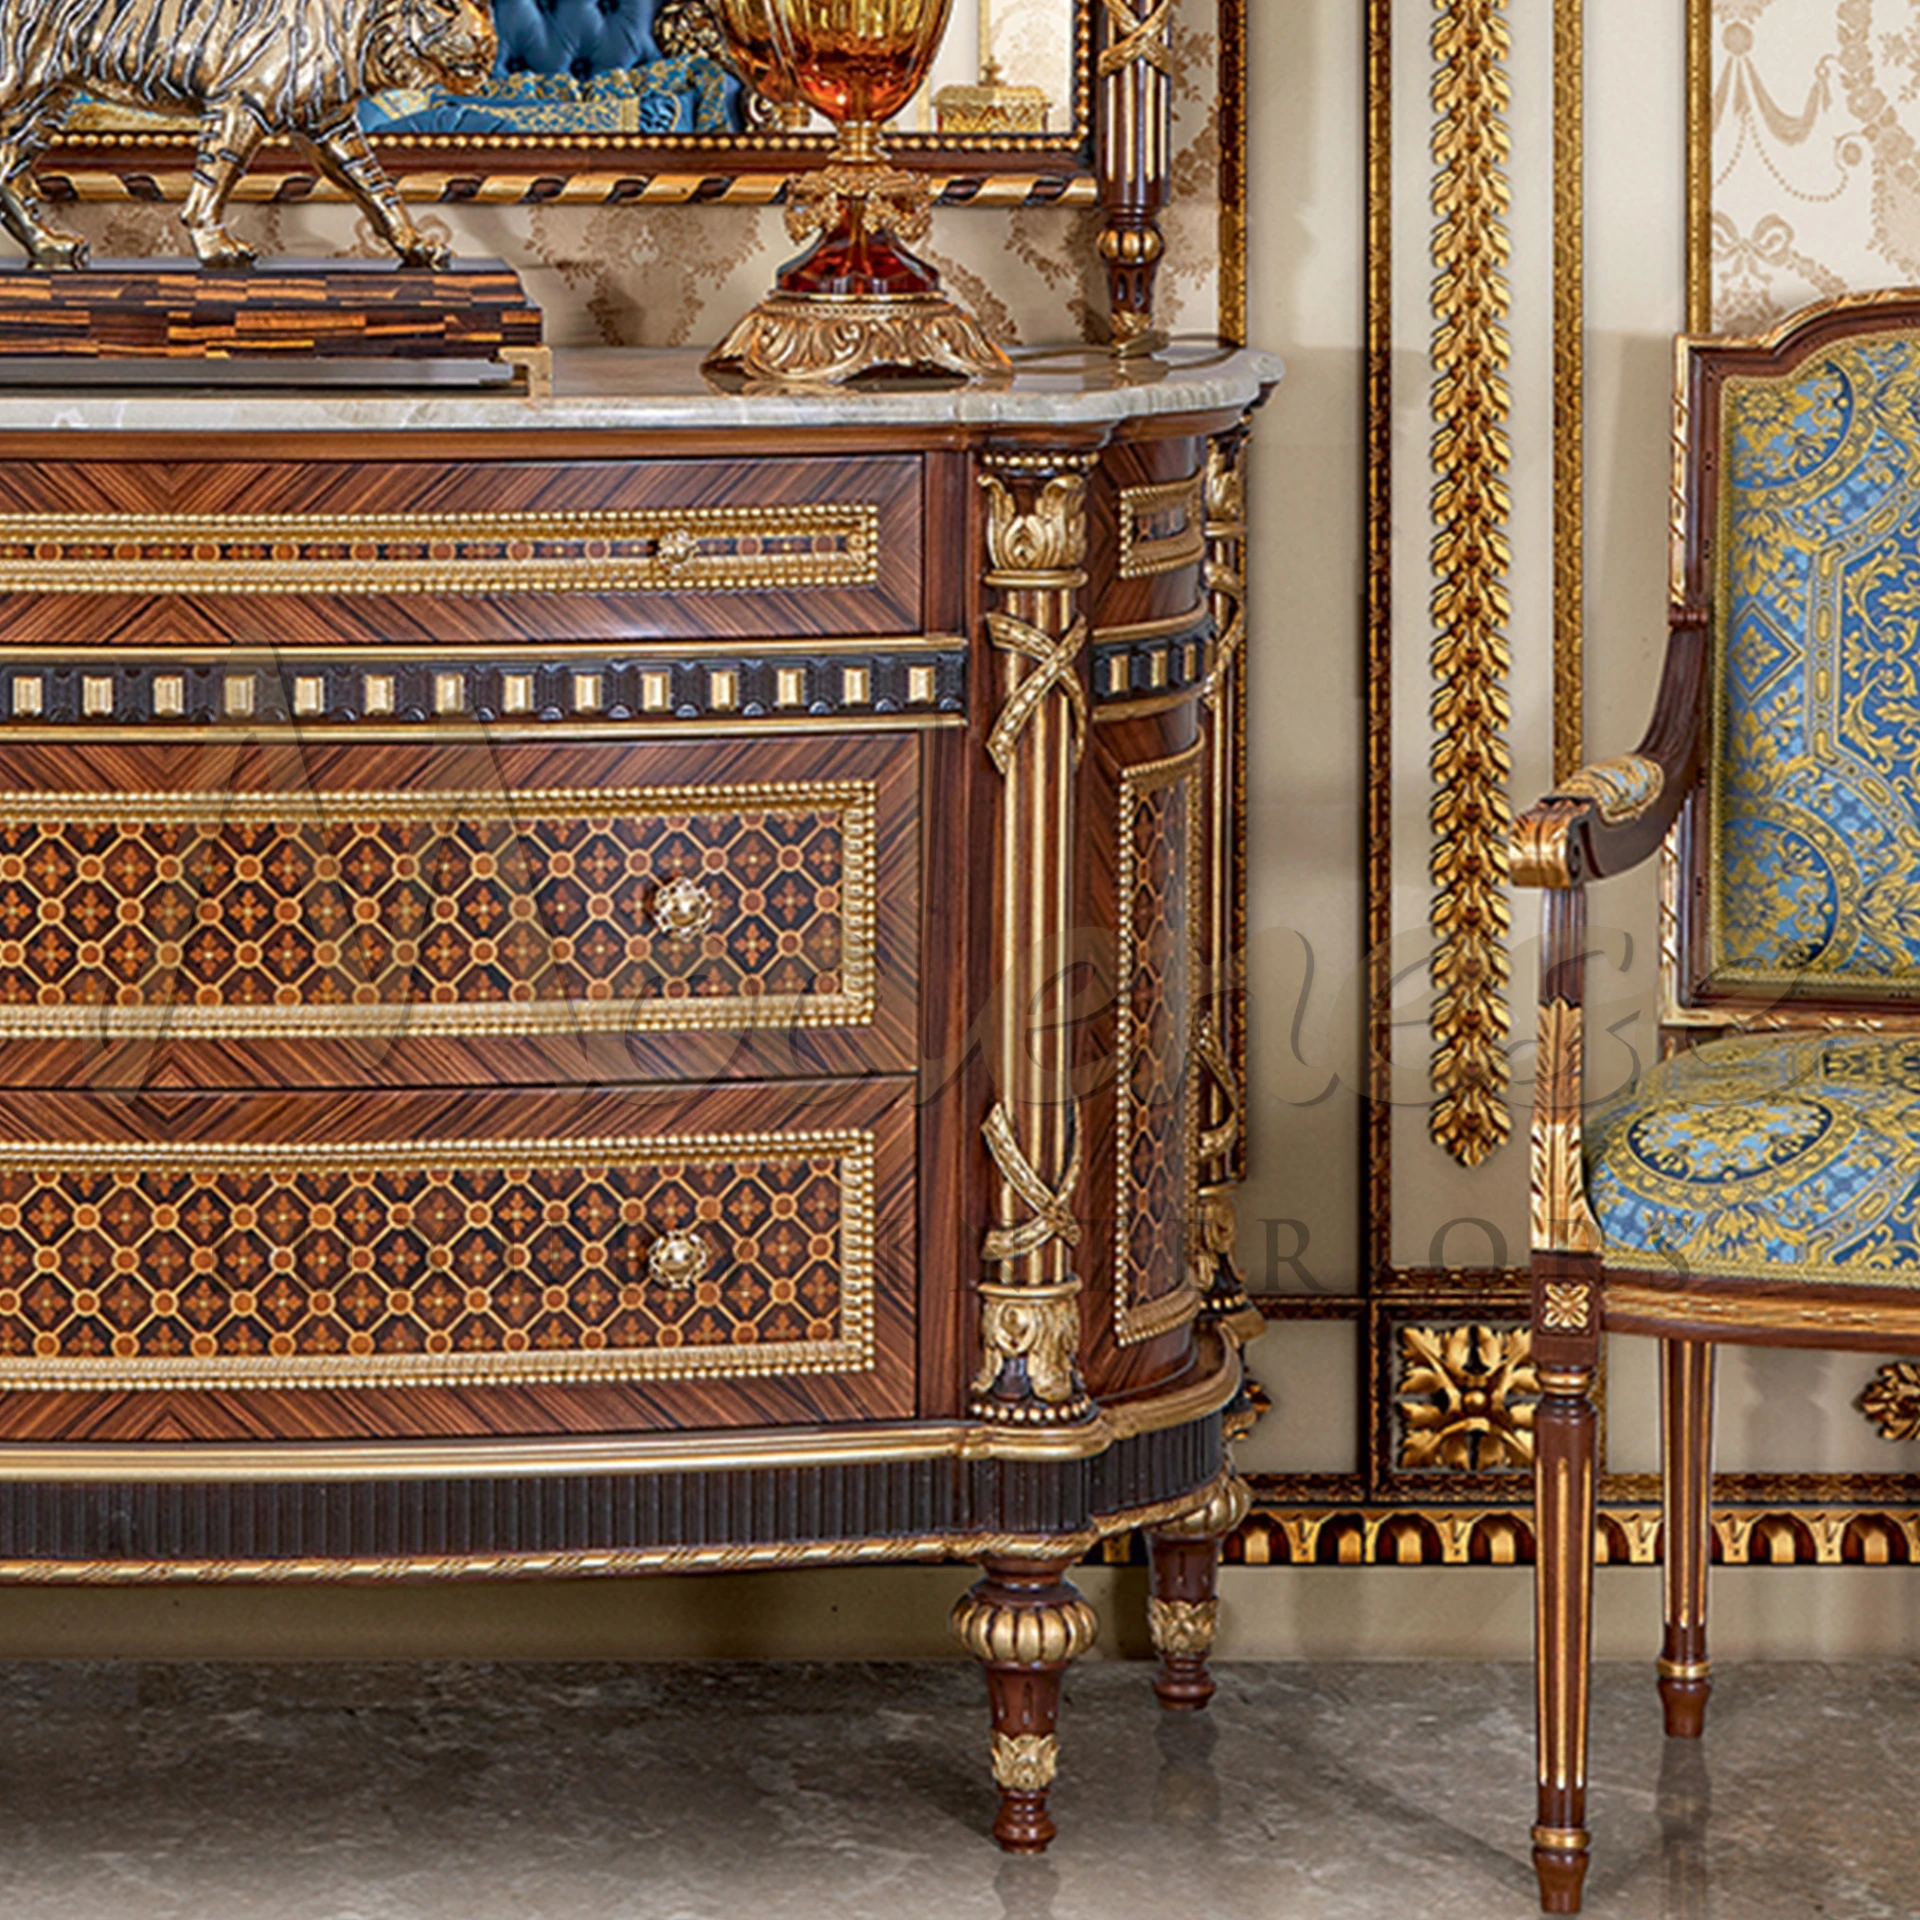 Immerse yourself in opulence with our French marquetry chest of drawers, showcasing refined craftsmanship and intricate detailing. Explore your decor with timeless sophistication.